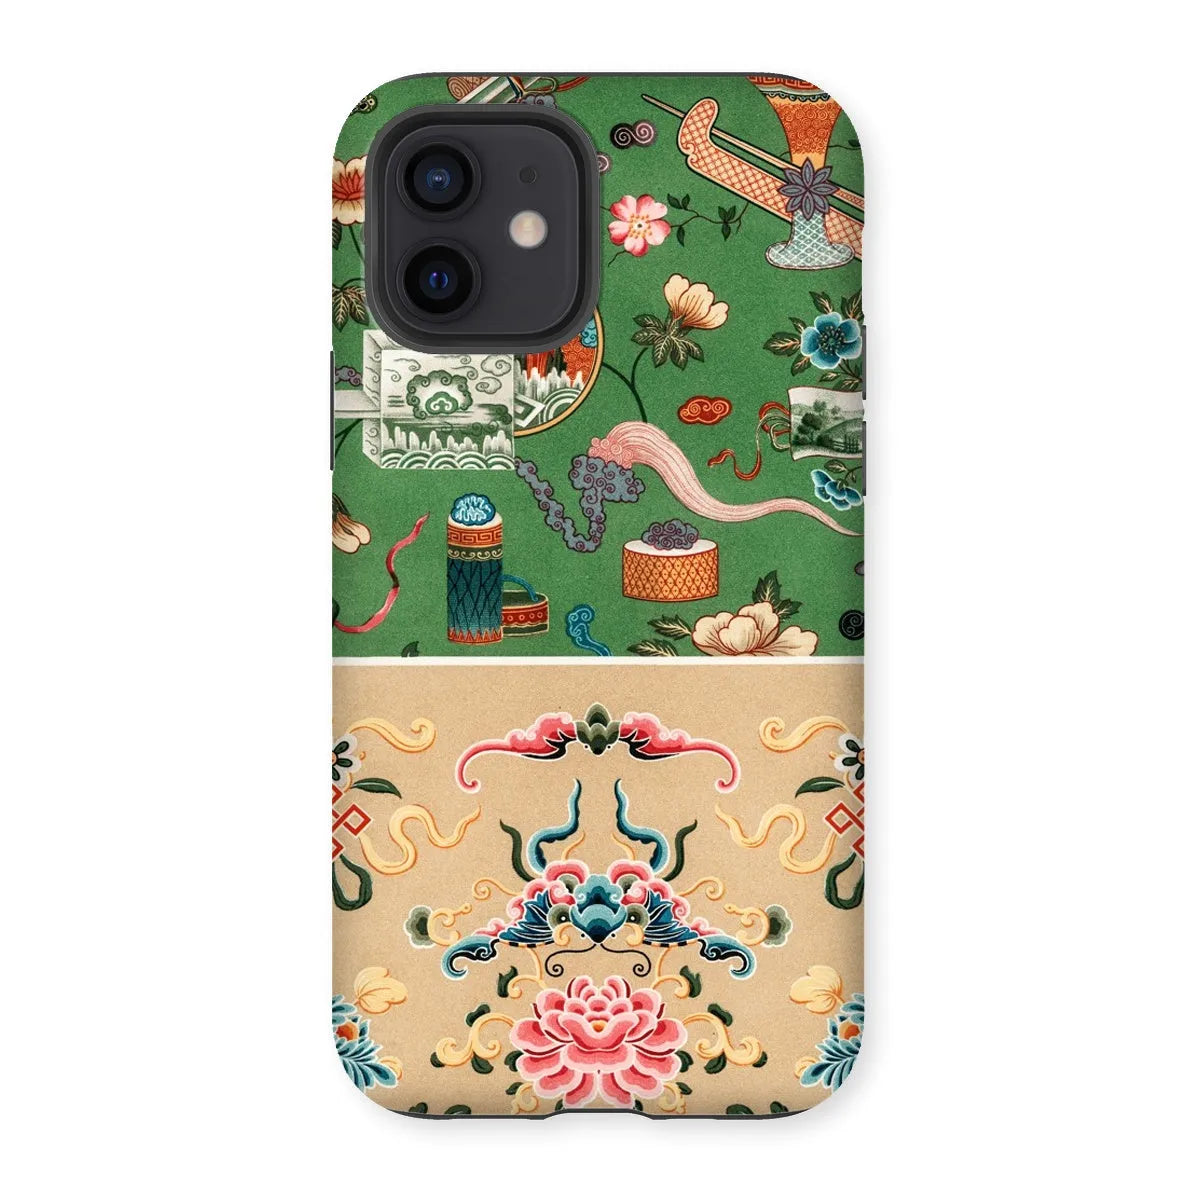 That Chinese Pattern By Auguste Racinet Tough Phone Case - Iphone Xs / Gloss - Mobile Phone Cases - Aesthetic Art